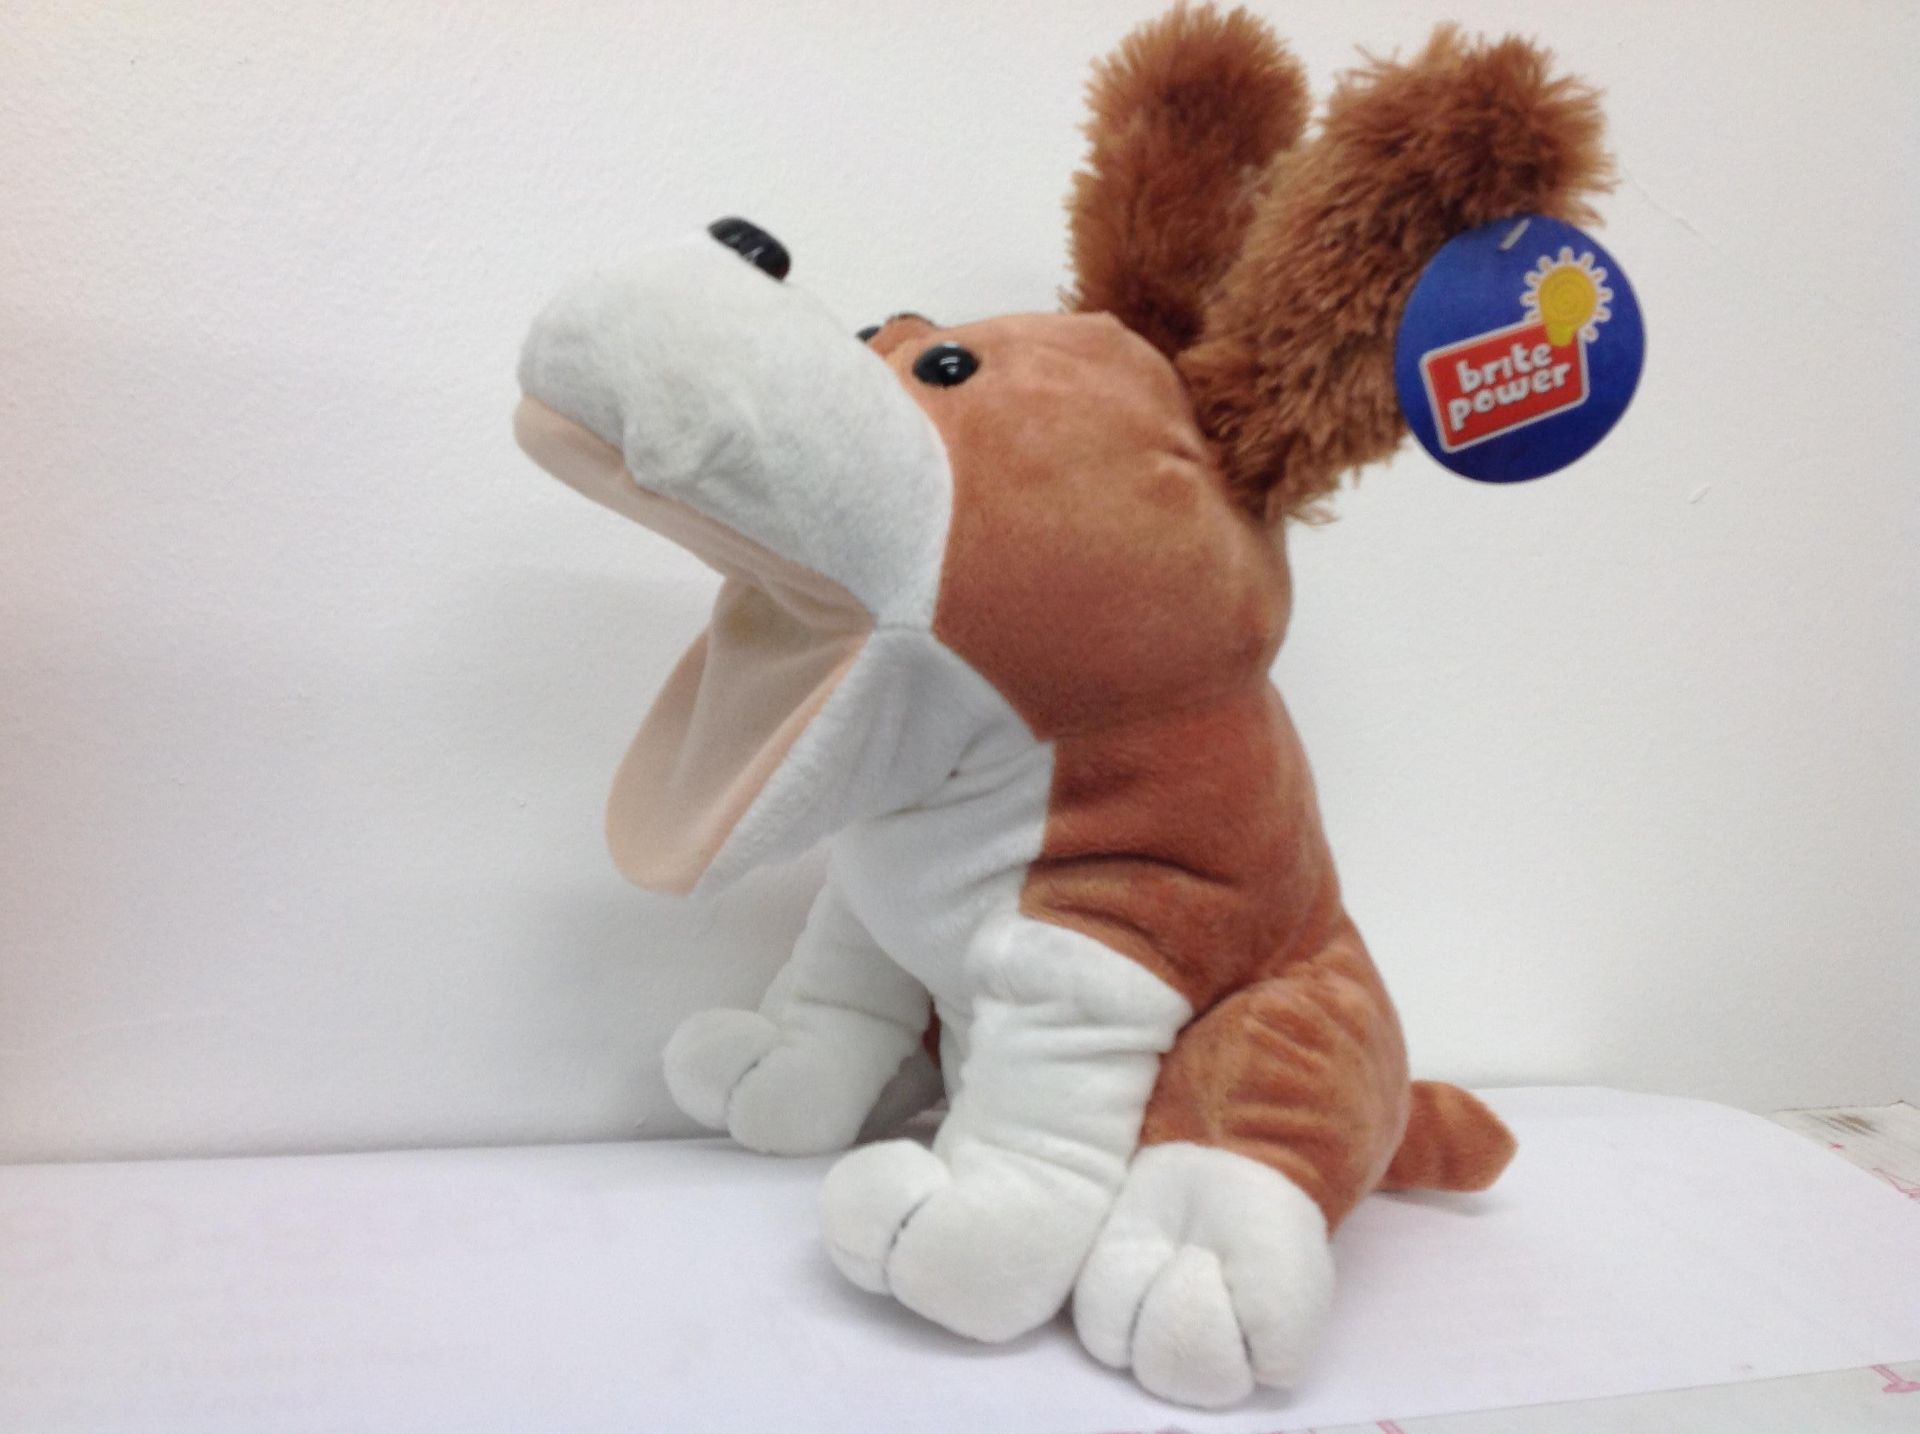 20 x Brite Power Talking Large Dog Hand Puppet. Brand new stock. RRP £19.99 each - Image 4 of 4